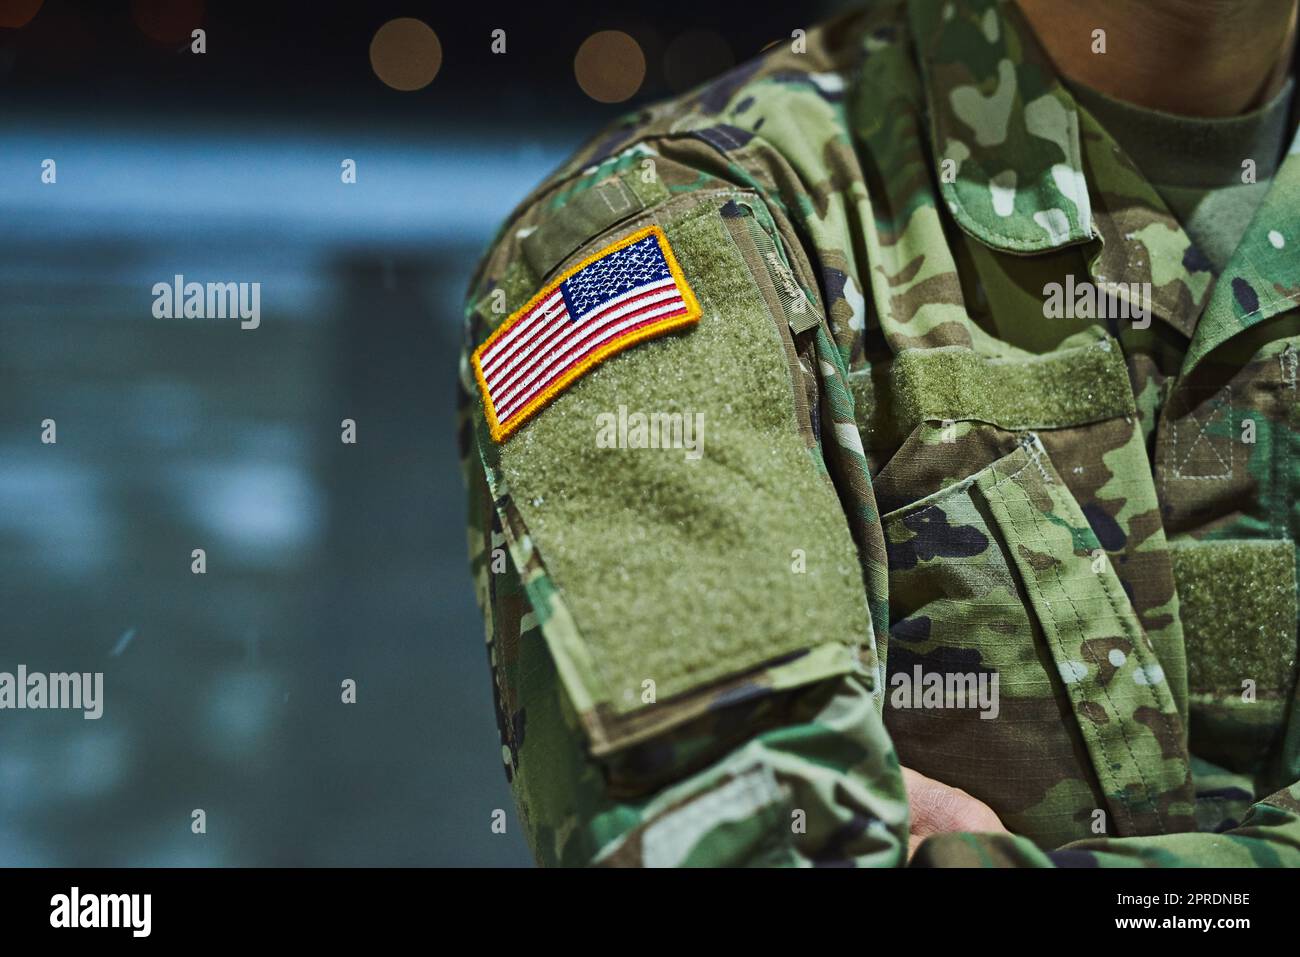 It takes someone special to serve their country. a soldier wearing camouflage fatigues with an american flag for a patch. Stock Photo